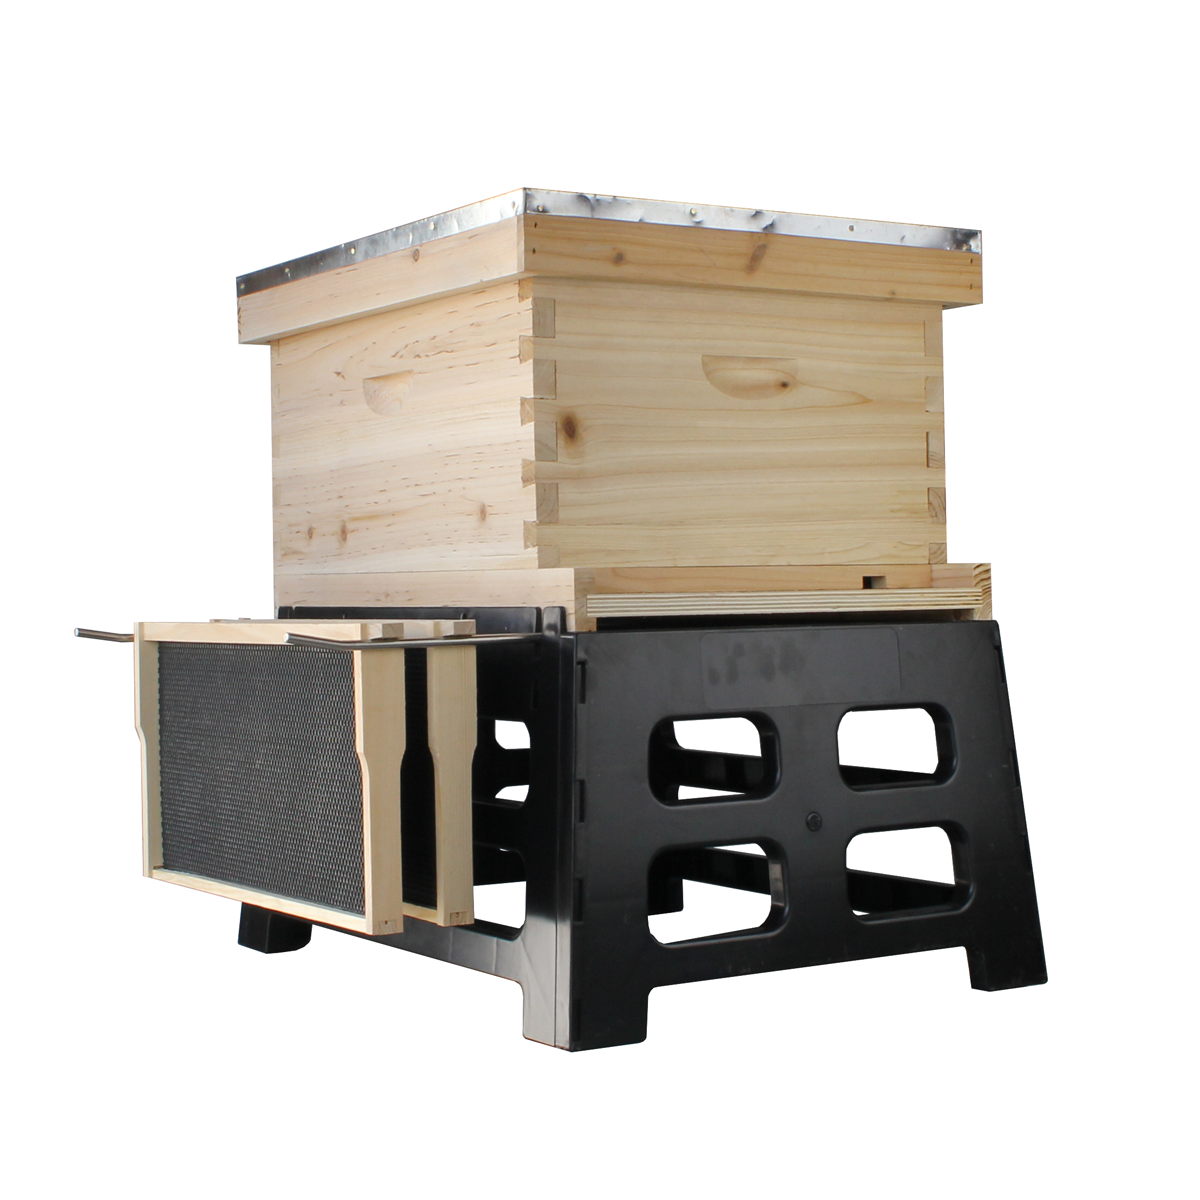 Black Plastic Hive Stand 12" Tall With 2 Metal Rods Coming Out The Side To Hold Beehive Frames On Top Is A 1 Deep Hive